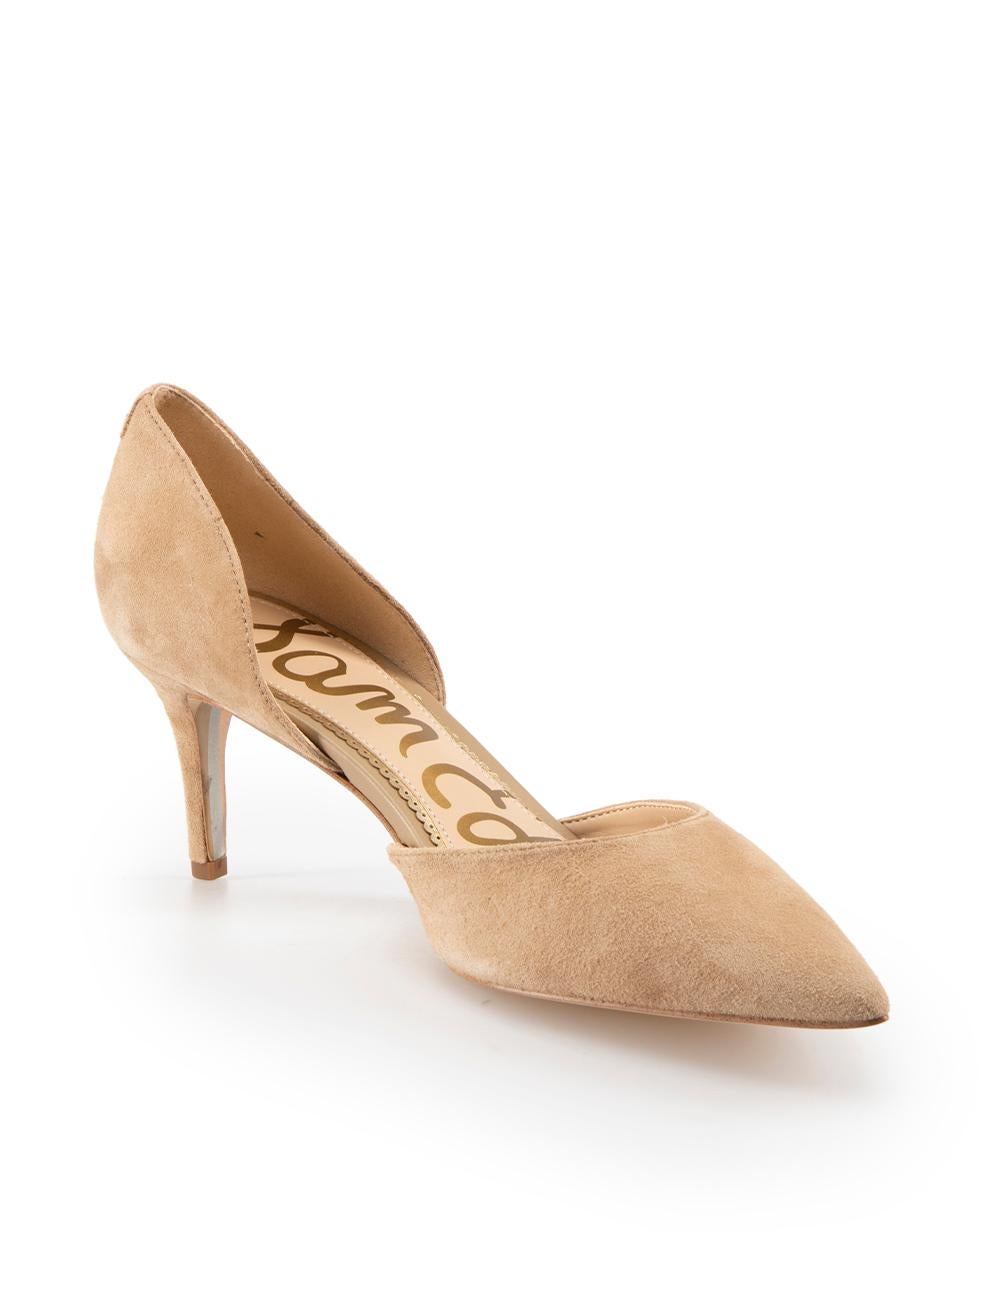 CONDITION is Never worn. No visible wear to heels is evident on this new Sam Edelman designer resale item. Comes in original box.

Details
Beige
Suede
Heels
Point toe
Slip on
Mid heel

Made in China

Composition
EXTERIOR: Suede
INTERIOR: